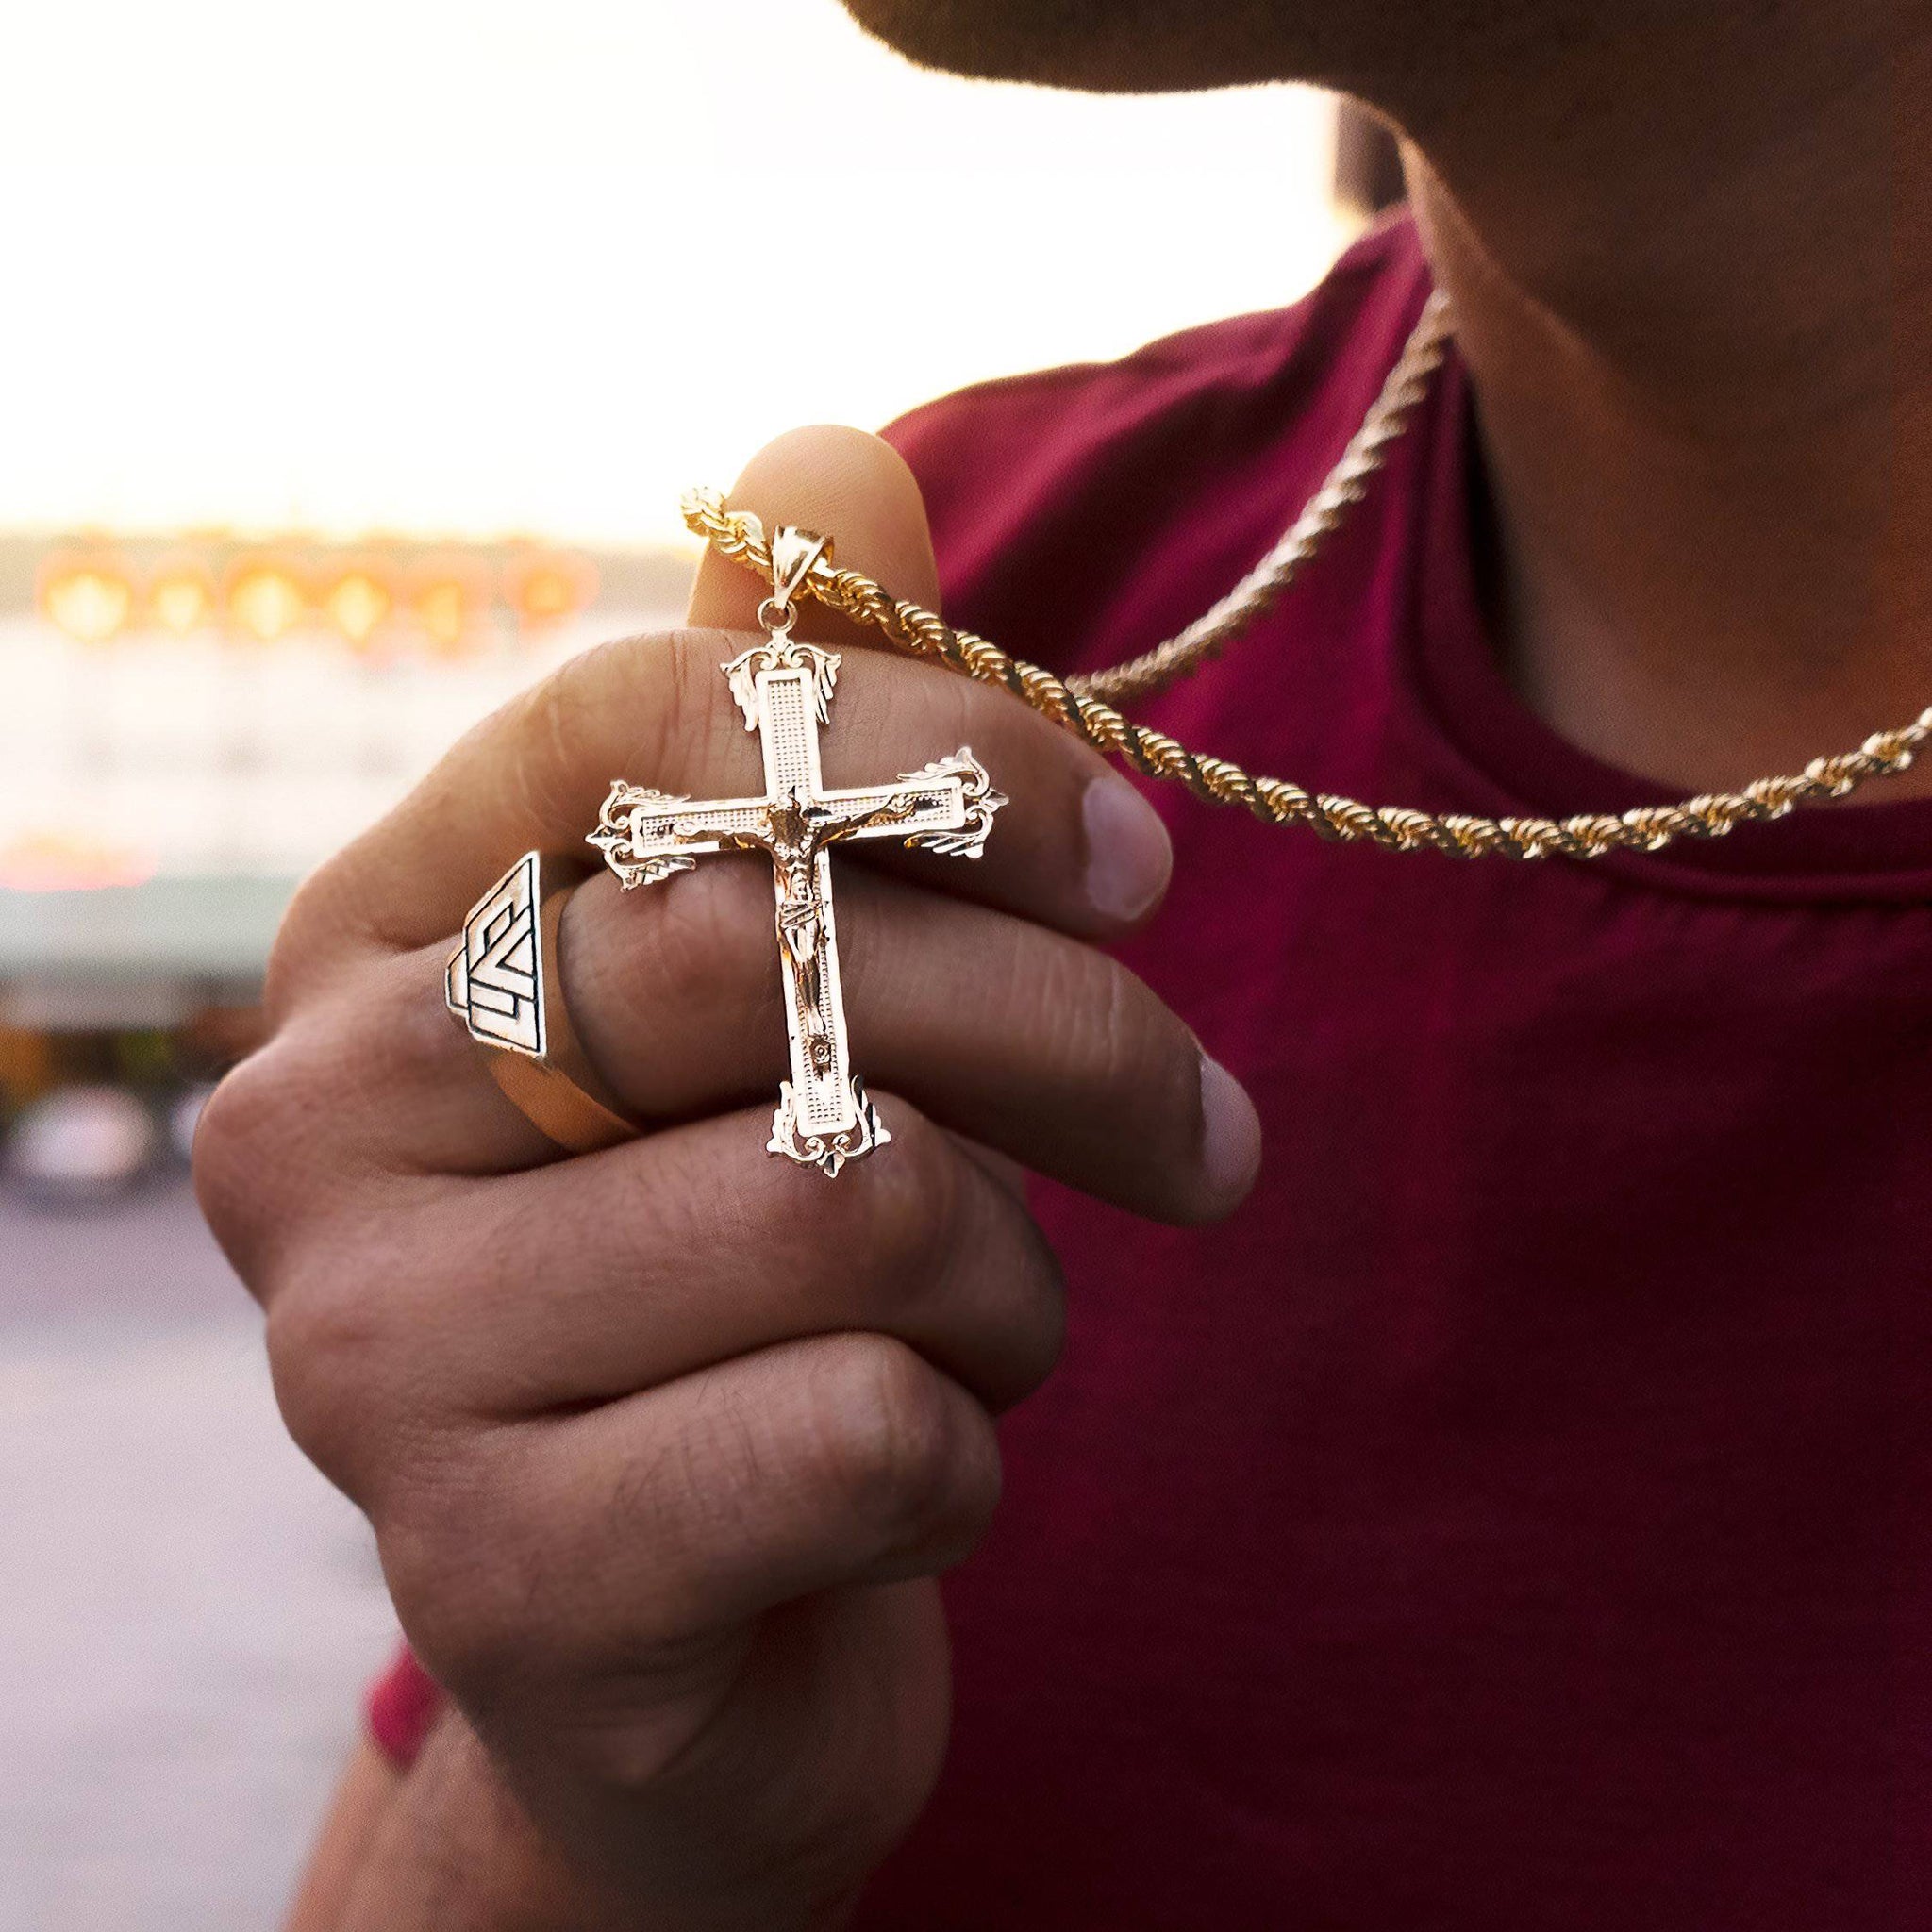 Small Gold Cross - 14-Karat Yellow Gold Cross Necklace: The King's Cro